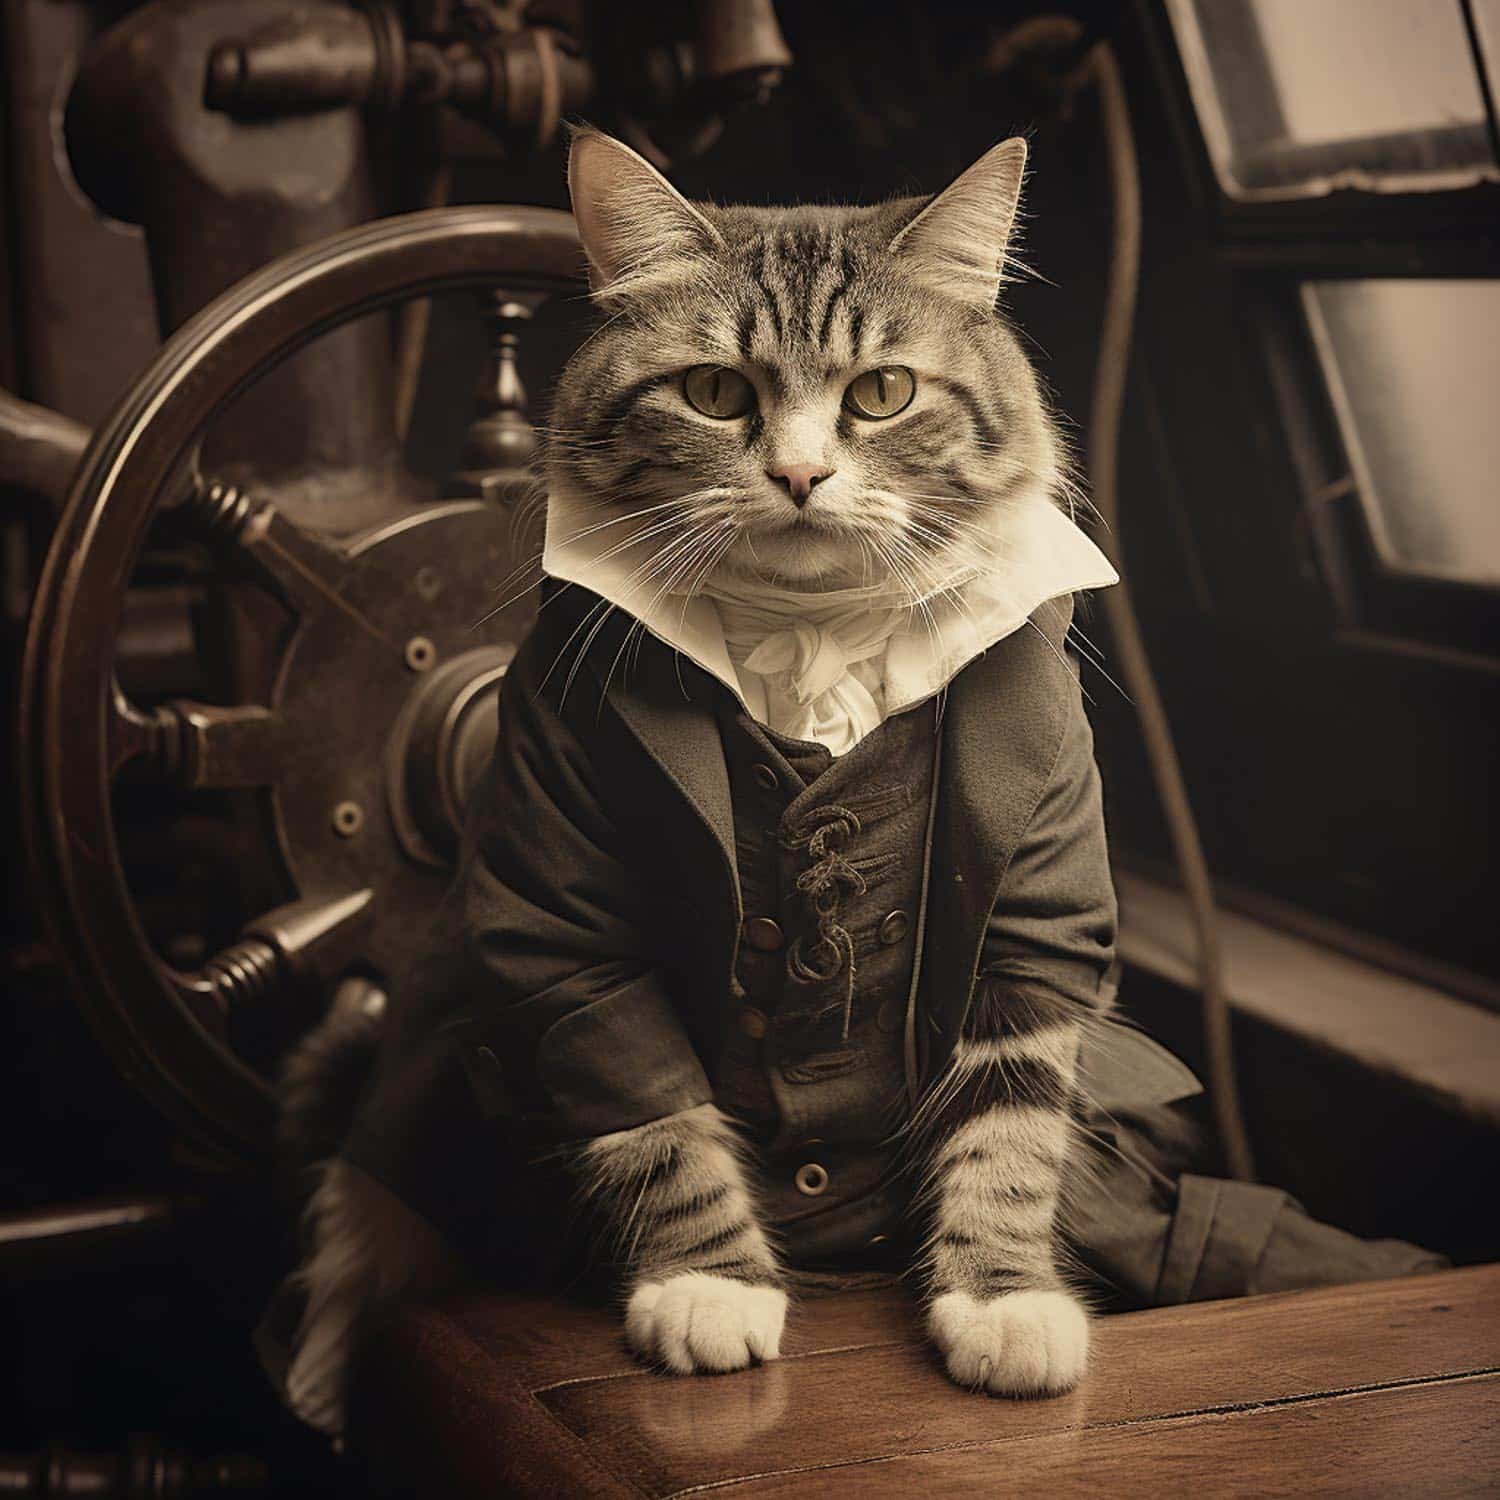 cat_dressed_as_sailor_on_a_steamship_1900s_blackandwhite